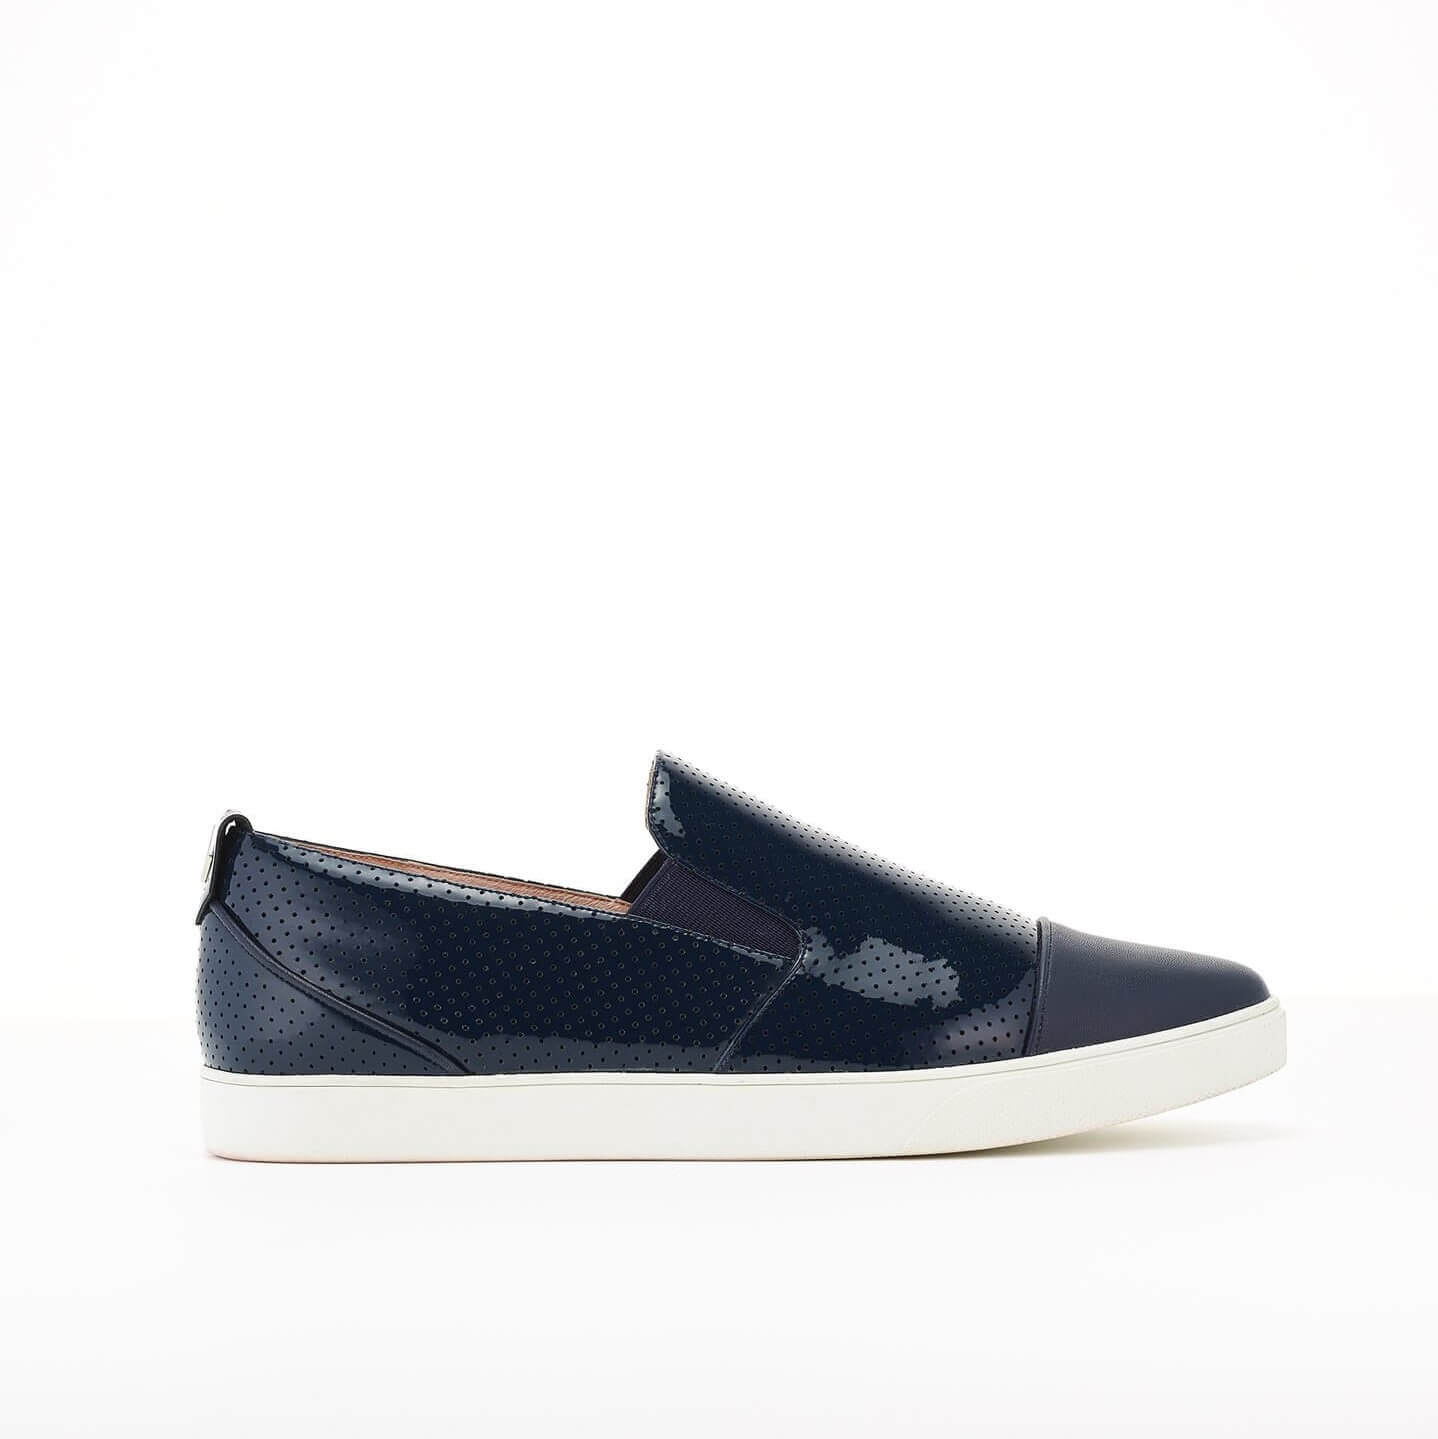 The Professional Sneaker in Navy | Everard's Clothing